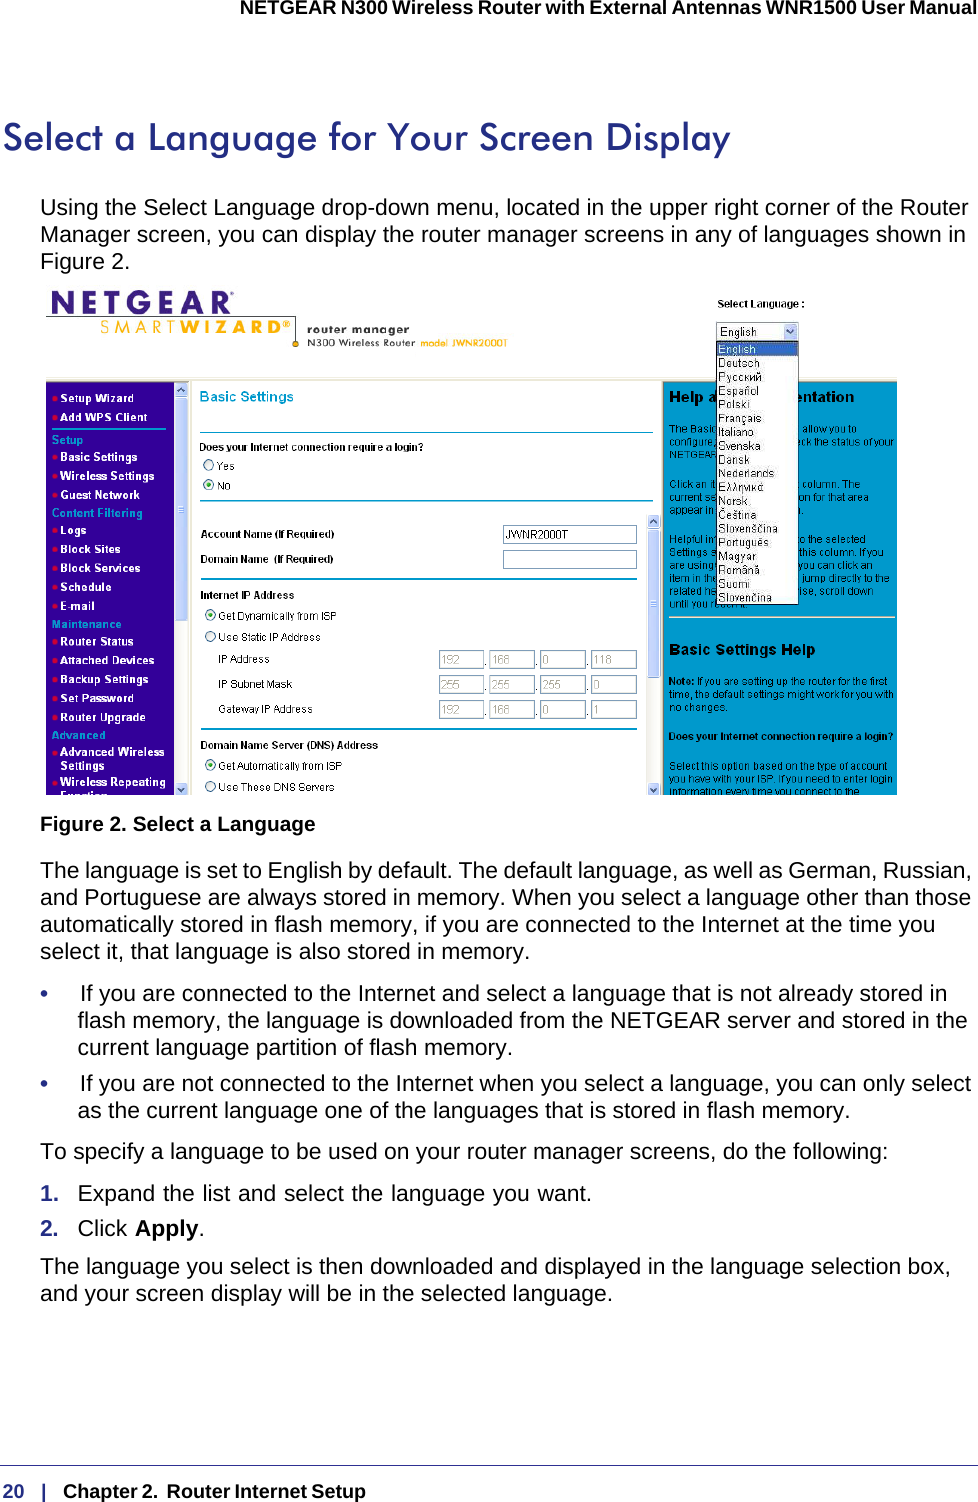 20   |   Chapter 2.  Router Internet Setup  NETGEAR N300 Wireless Router with External Antennas WNR1500 User Manual Select a Language for Your Screen DisplayUsing the Select Language drop-down menu, located in the upper right corner of the Router Manager screen, you can display the router manager screens in any of languages shown in Figure 2.Figure 2. Select a LanguageThe language is set to English by default. The default language, as well as German, Russian, and Portuguese are always stored in memory. When you select a language other than those automatically stored in flash memory, if you are connected to the Internet at the time you select it, that language is also stored in memory. •     If you are connected to the Internet and select a language that is not already stored in flash memory, the language is downloaded from the NETGEAR server and stored in the current language partition of flash memory. •     If you are not connected to the Internet when you select a language, you can only select as the current language one of the languages that is stored in flash memory.To specify a language to be used on your router manager screens, do the following:1.  Expand the list and select the language you want. 2.  Click Apply.The language you select is then downloaded and displayed in the language selection box, and your screen display will be in the selected language.